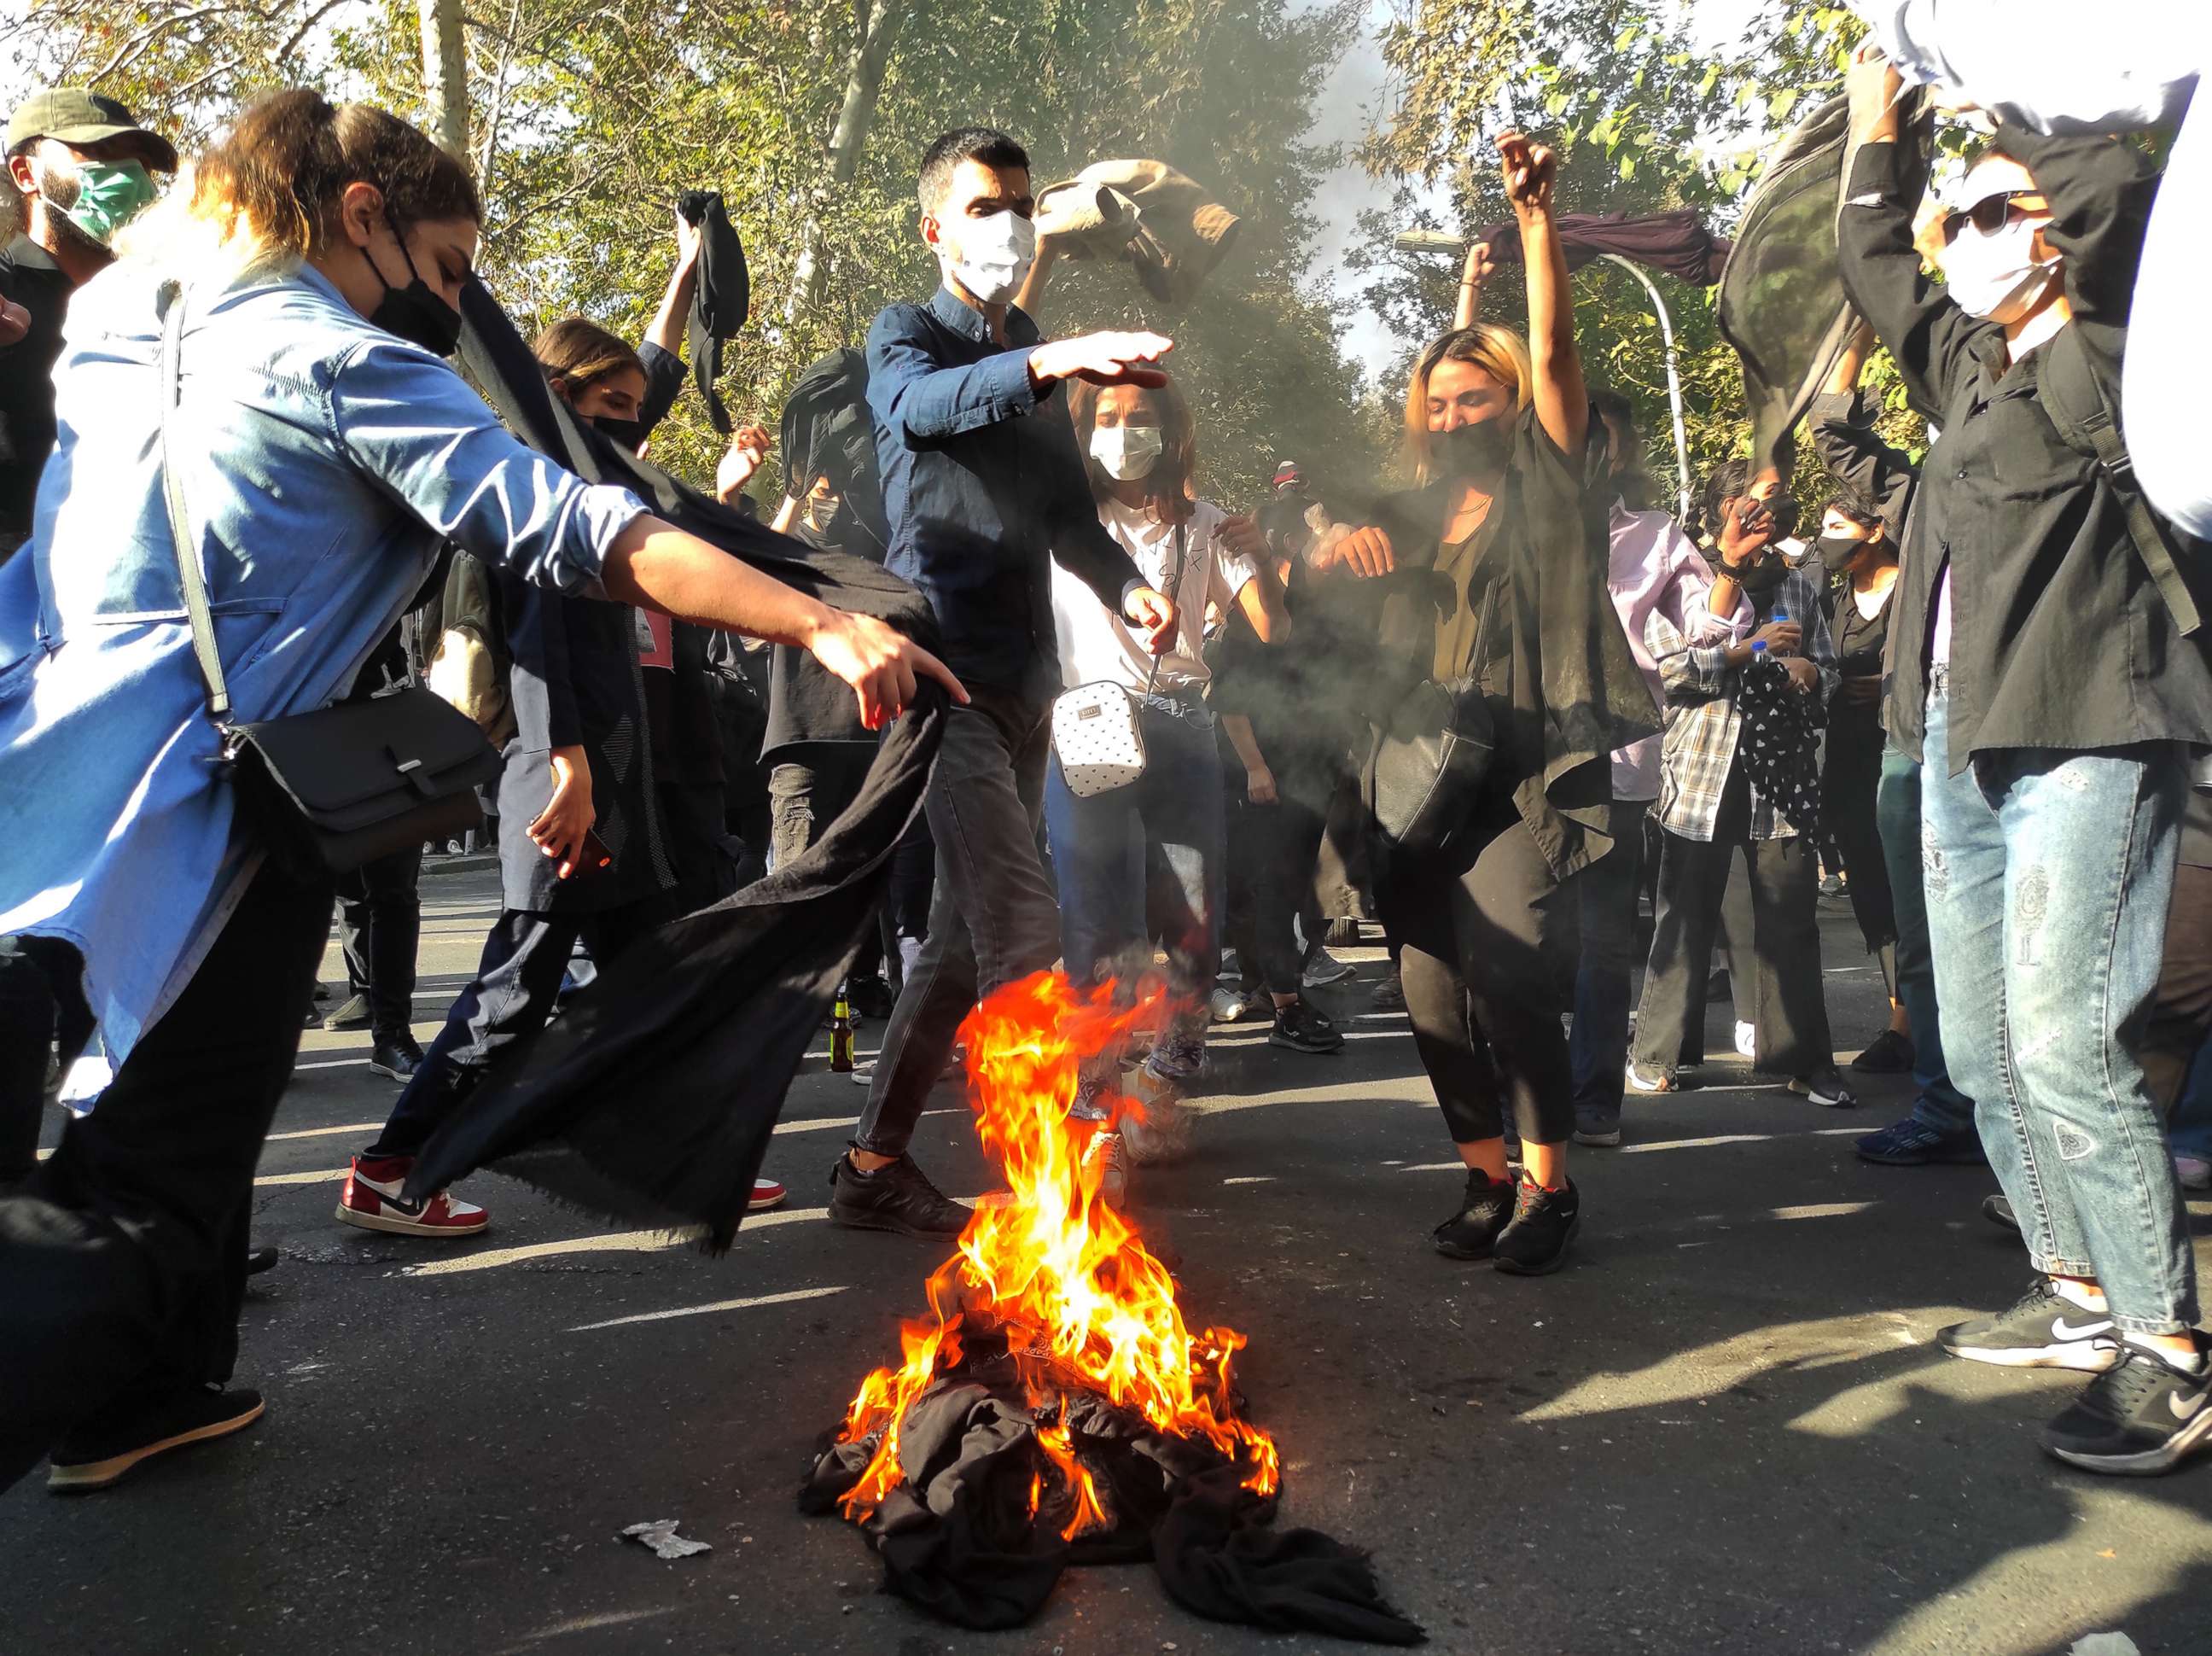 PHOTO: Iranian protesters set their scarves on fire while marching down a street on Oct. 1, 2022 in Tehran, Iran.